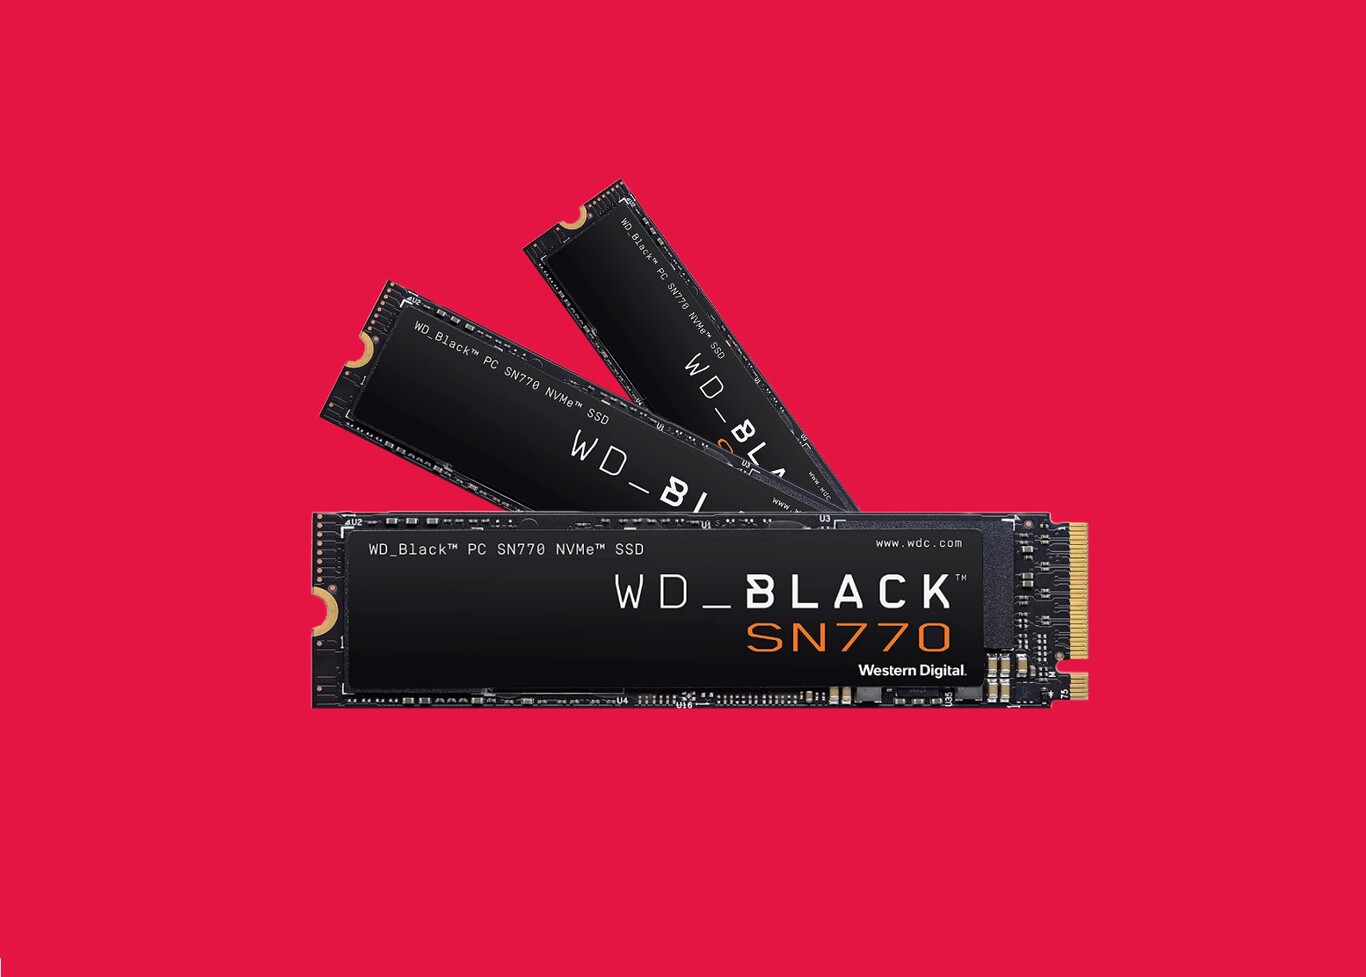 These 2 TB NVMe SSDs have made the market efficiently in budget